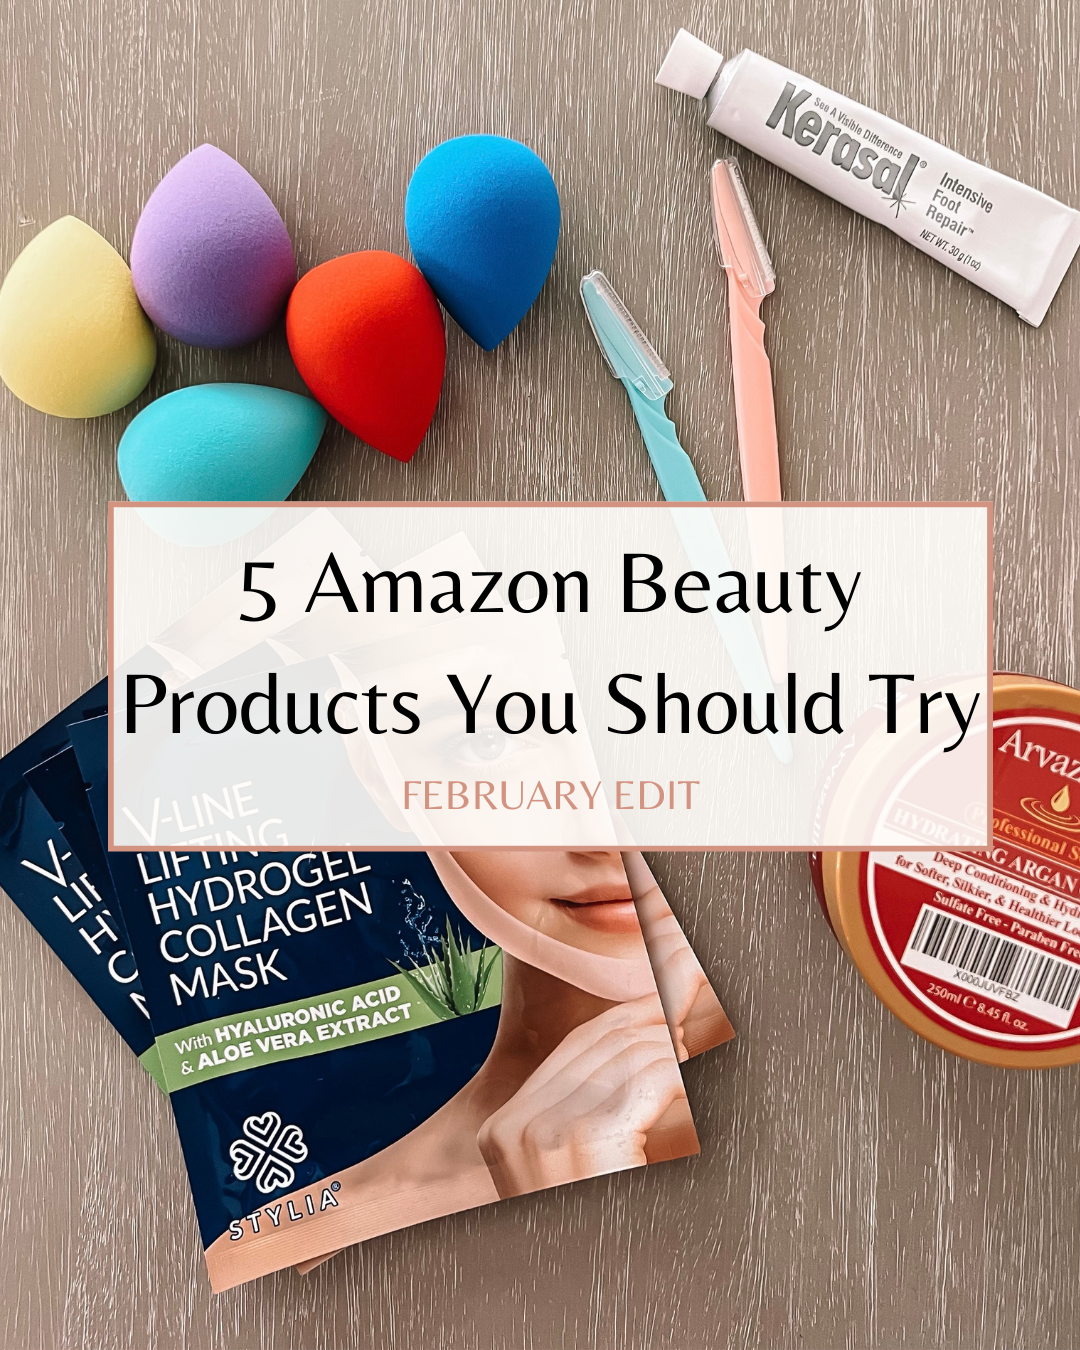 5 Amazon Beauty Products I Think You Should Try – February Edit